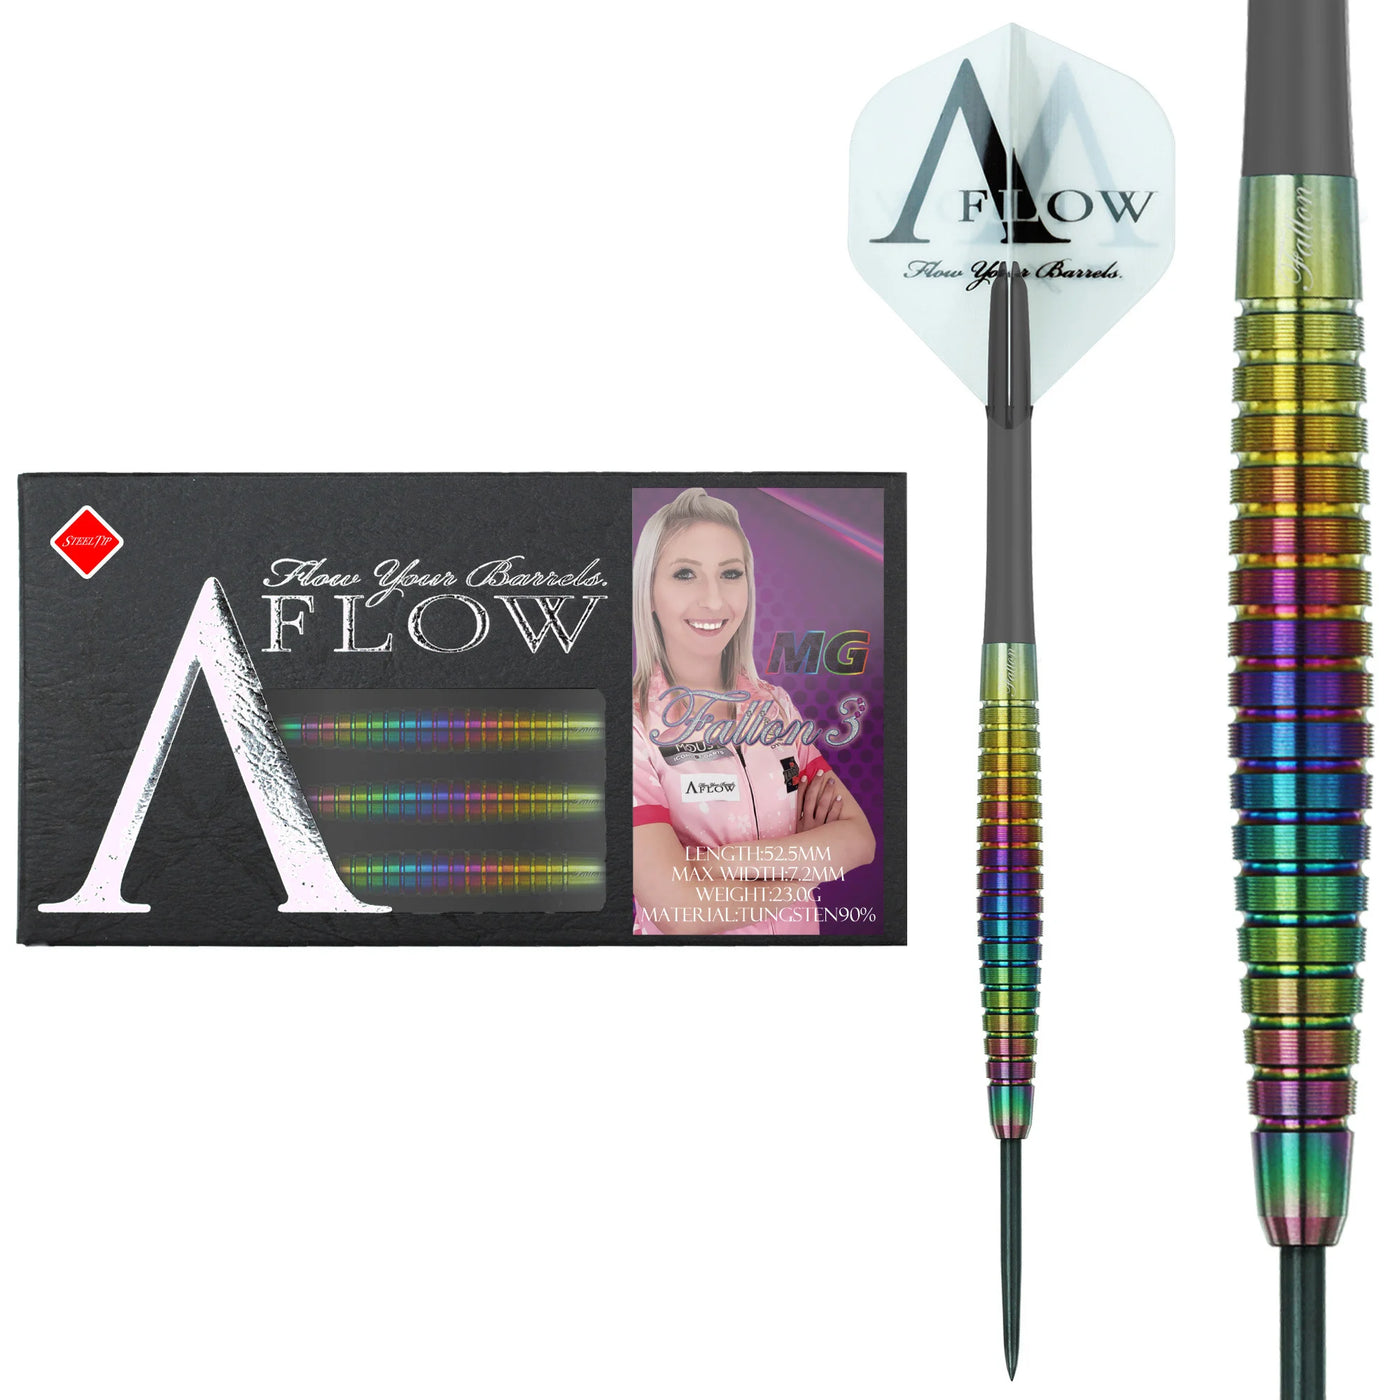 Dynasty Fallon "Queen Of The Palace" Sherrock 3 Rainbow 90% - Steel Tip